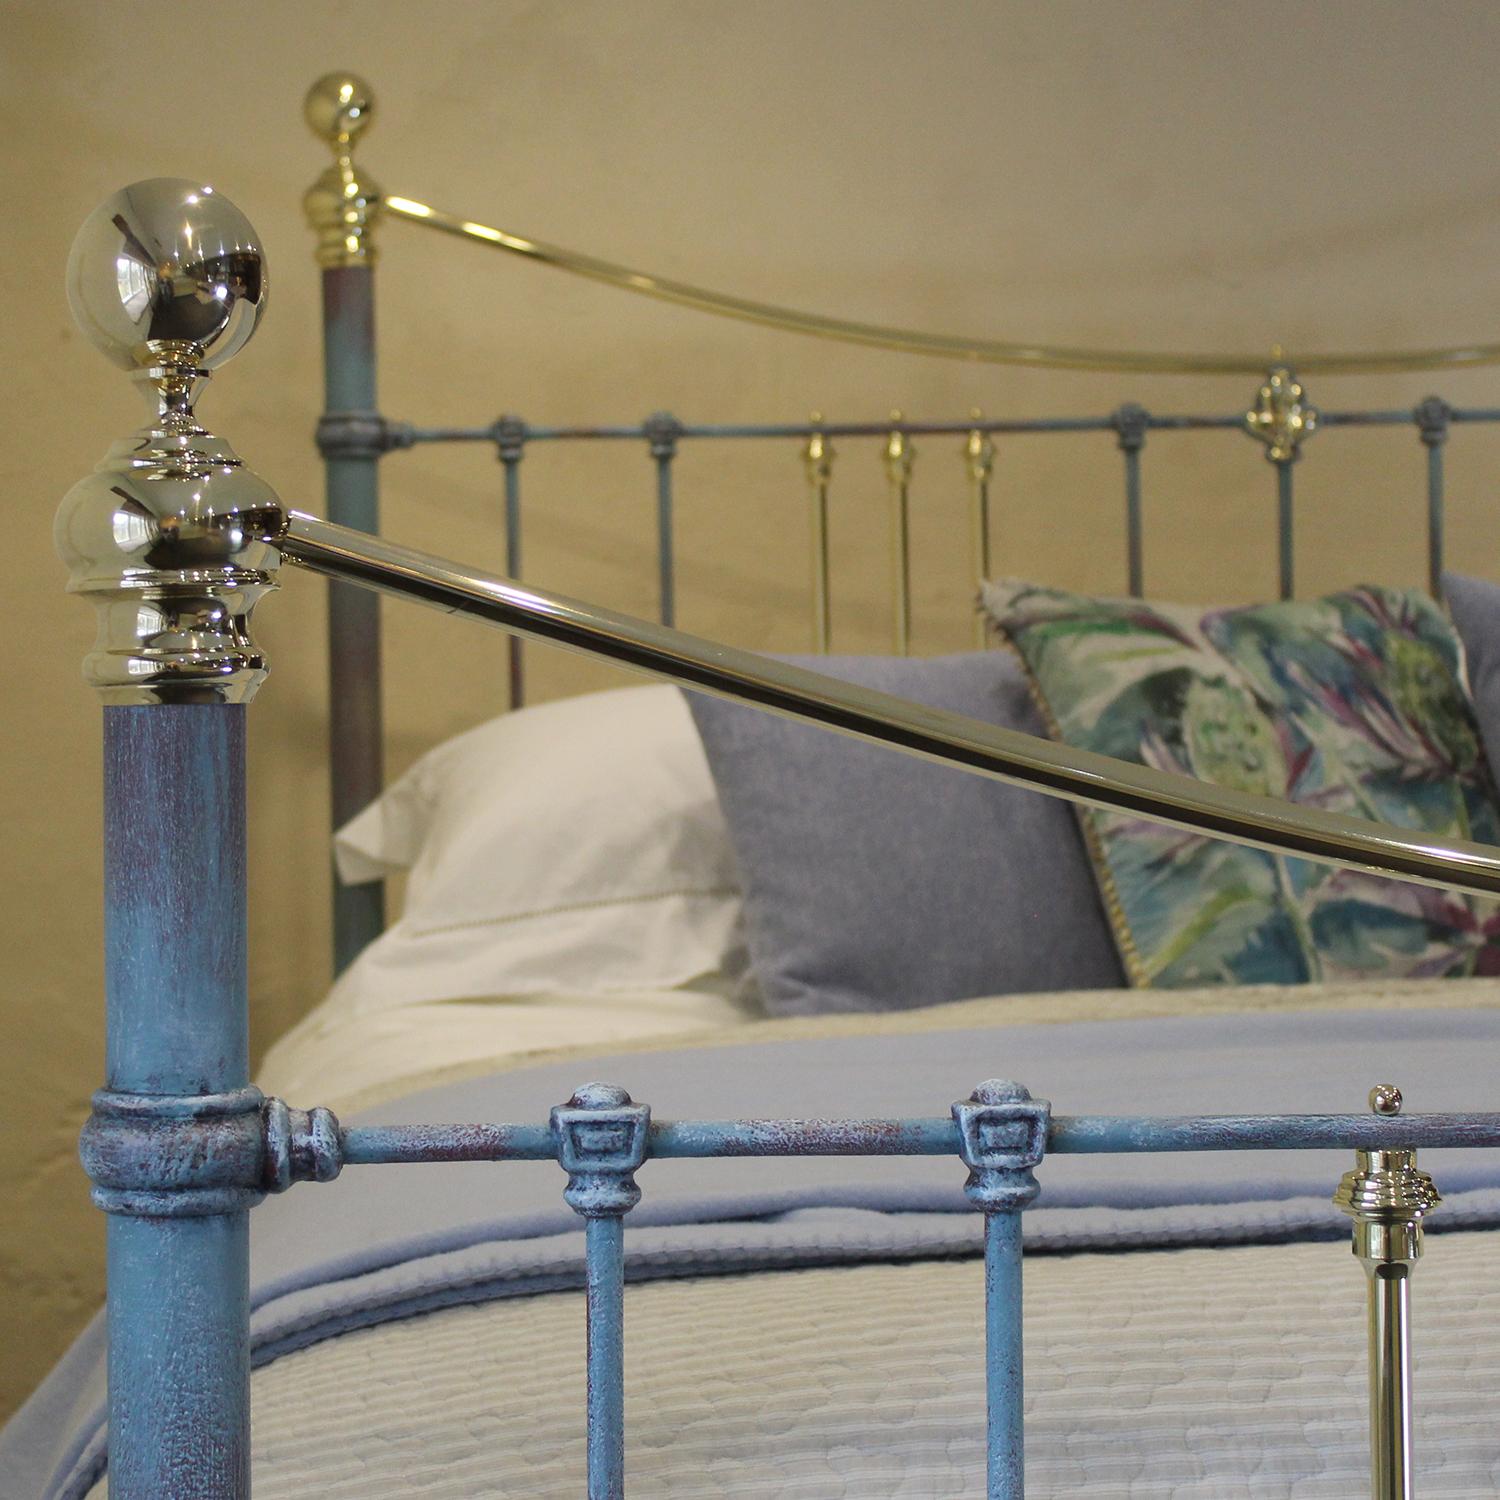 Late 19th Century Wide Antique Bed in Verdigris MSK69